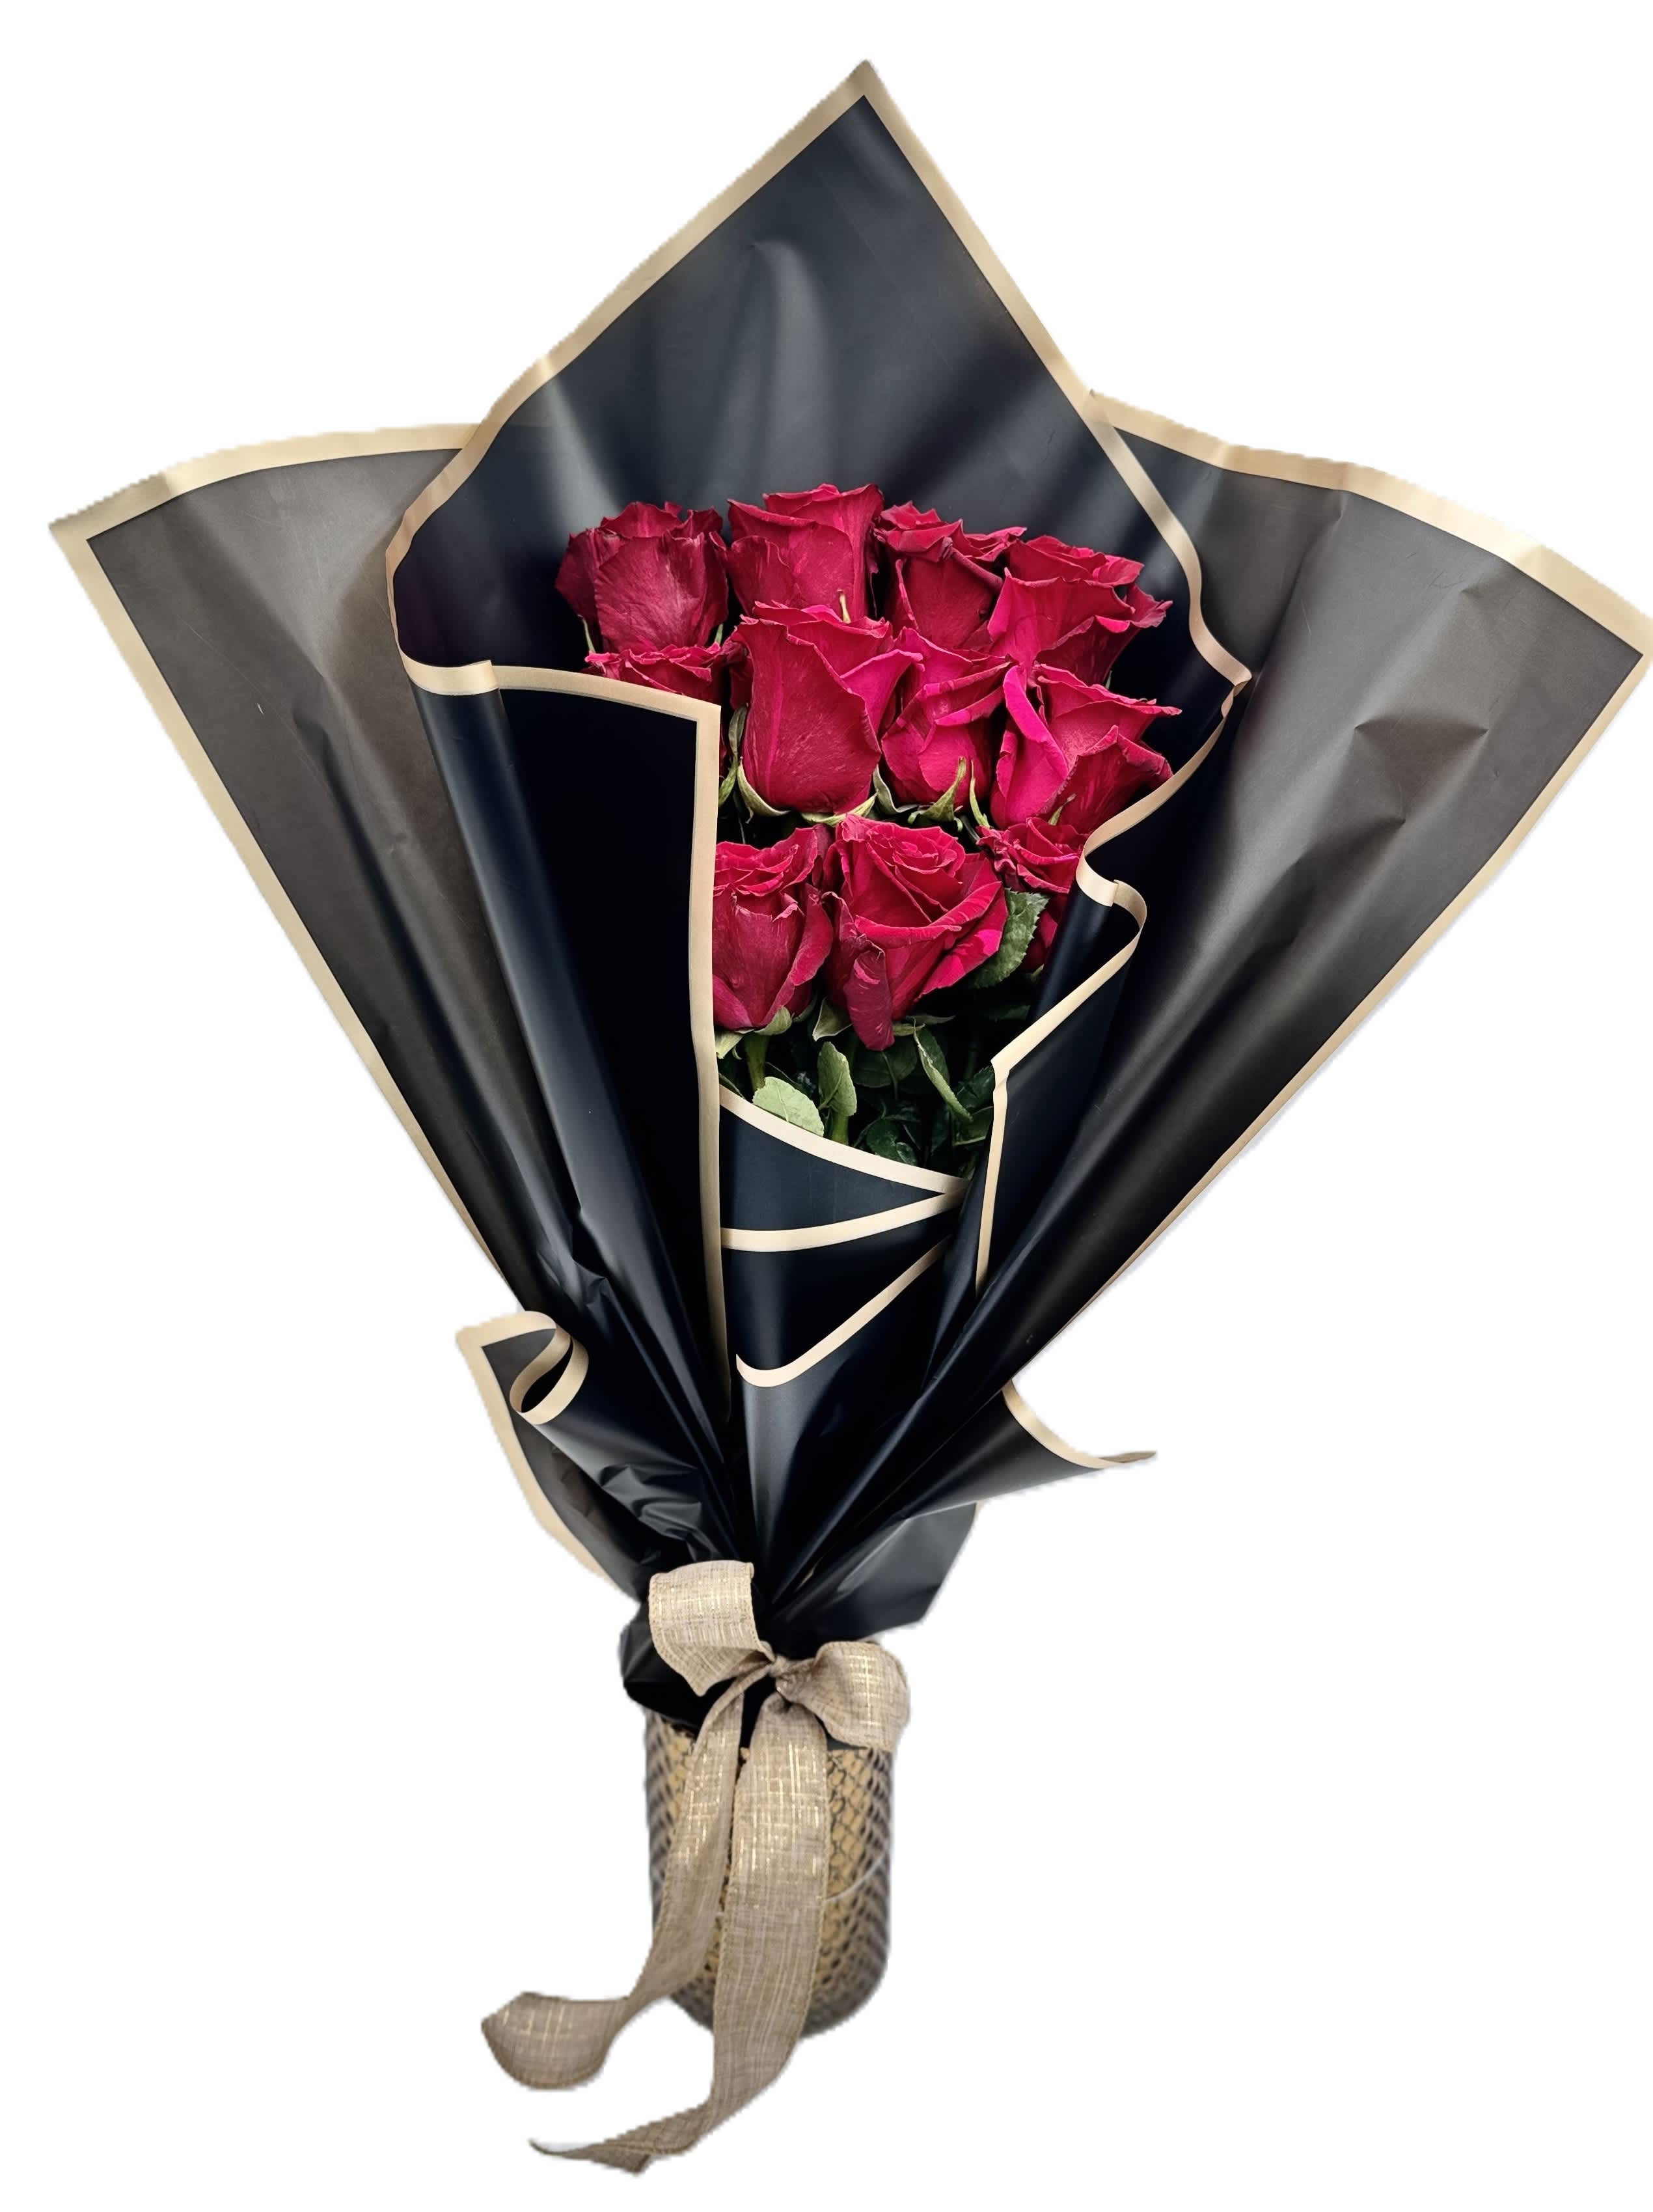 Vibrant Roses / Rosas Vibrantes  - Elegant bouquet in wrap with 12 roses